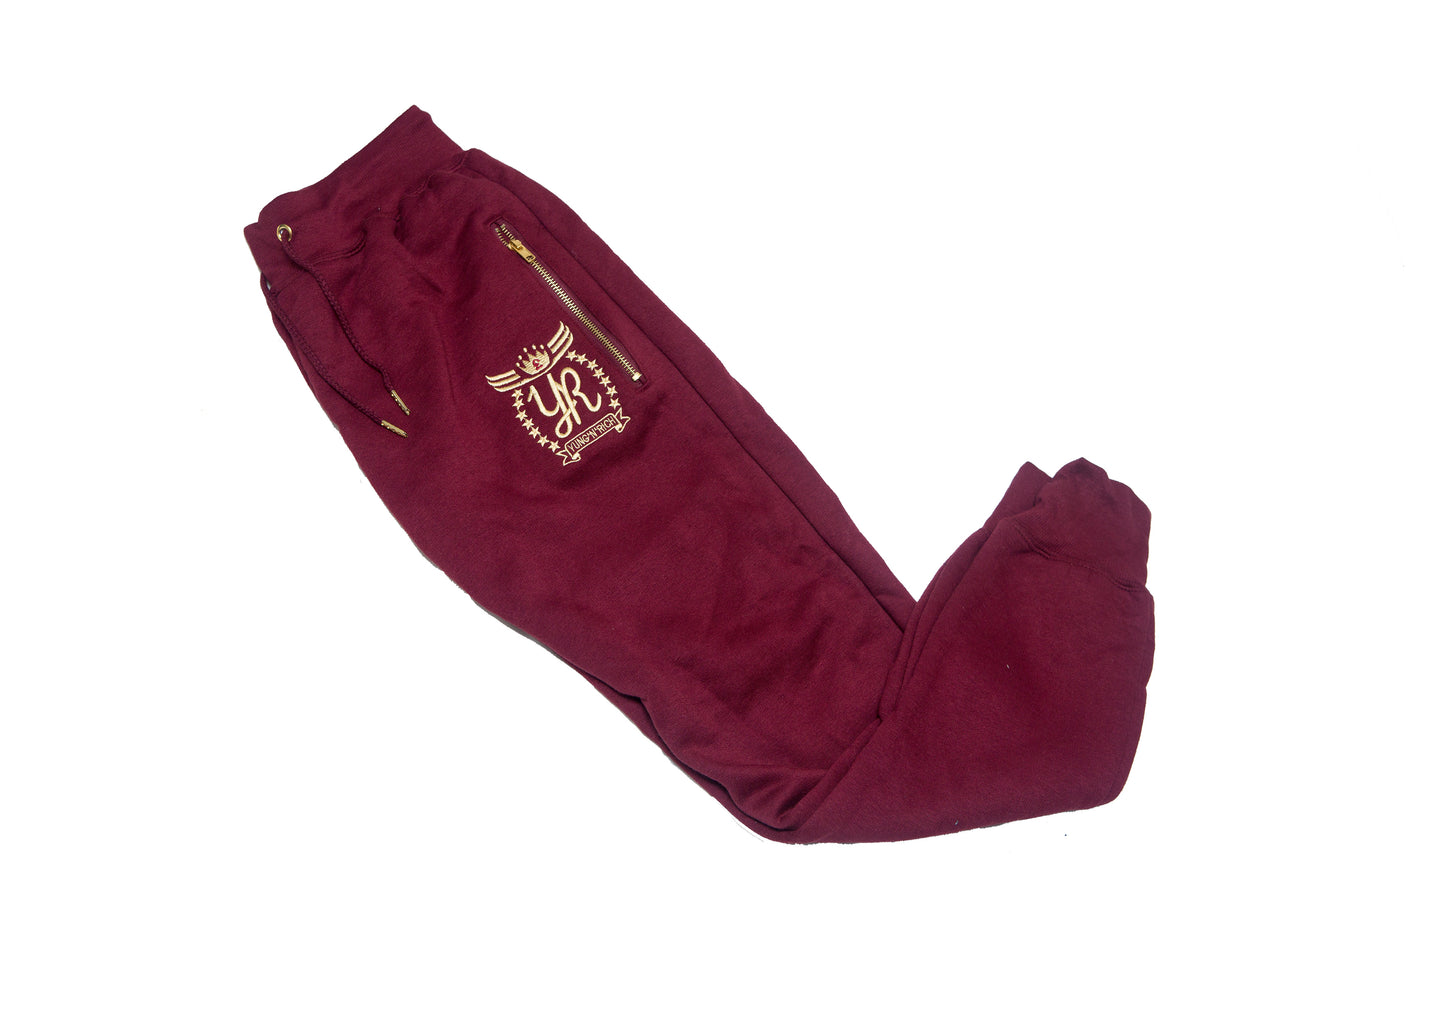 YUNG'N'RICH | GOLD EDITION BURGUNDY TRACKSUIT BOTTOMS